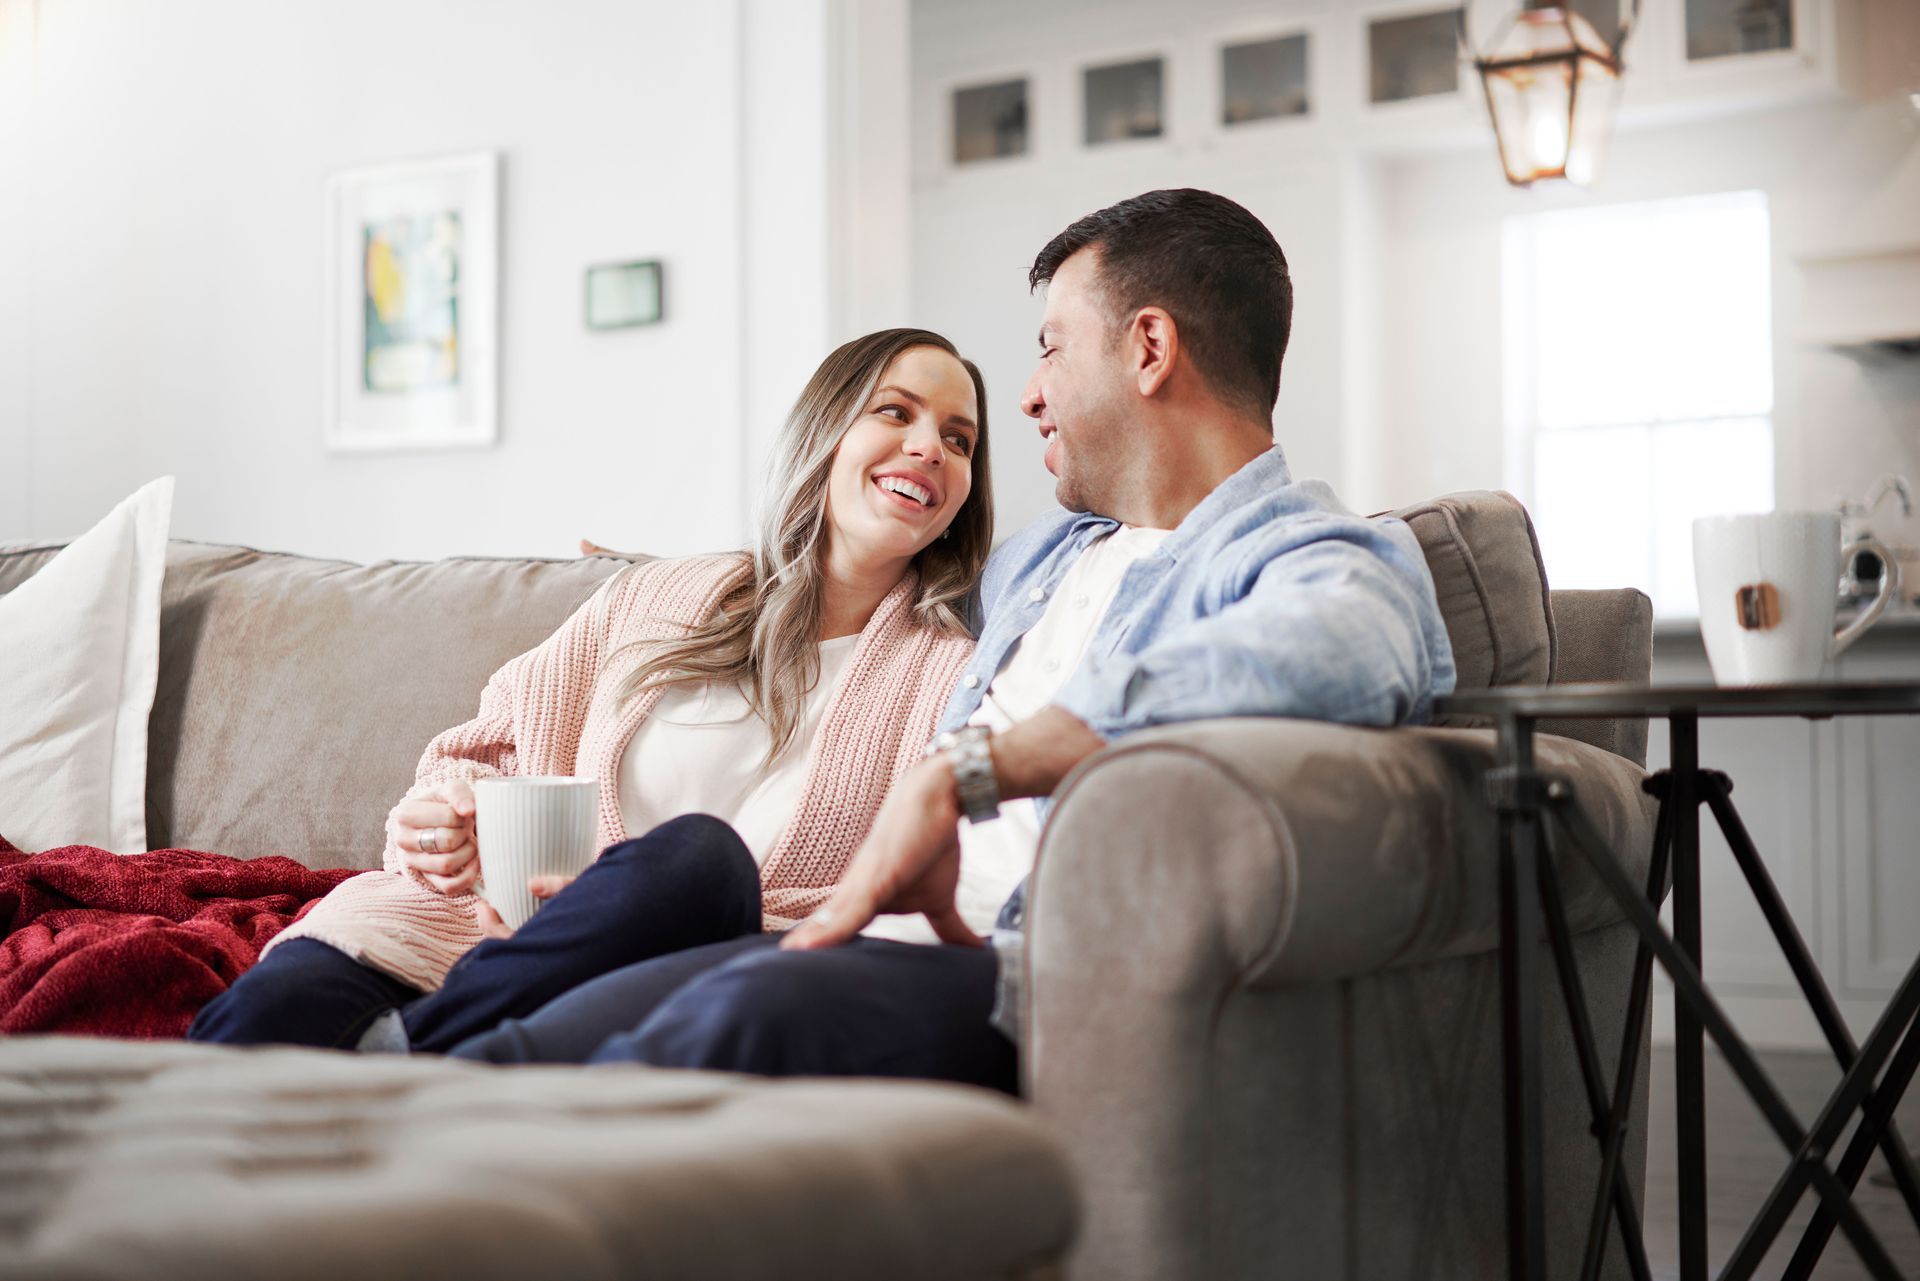 Husband and wife sitting on the living room couch drinking coffee and smiling at each other.